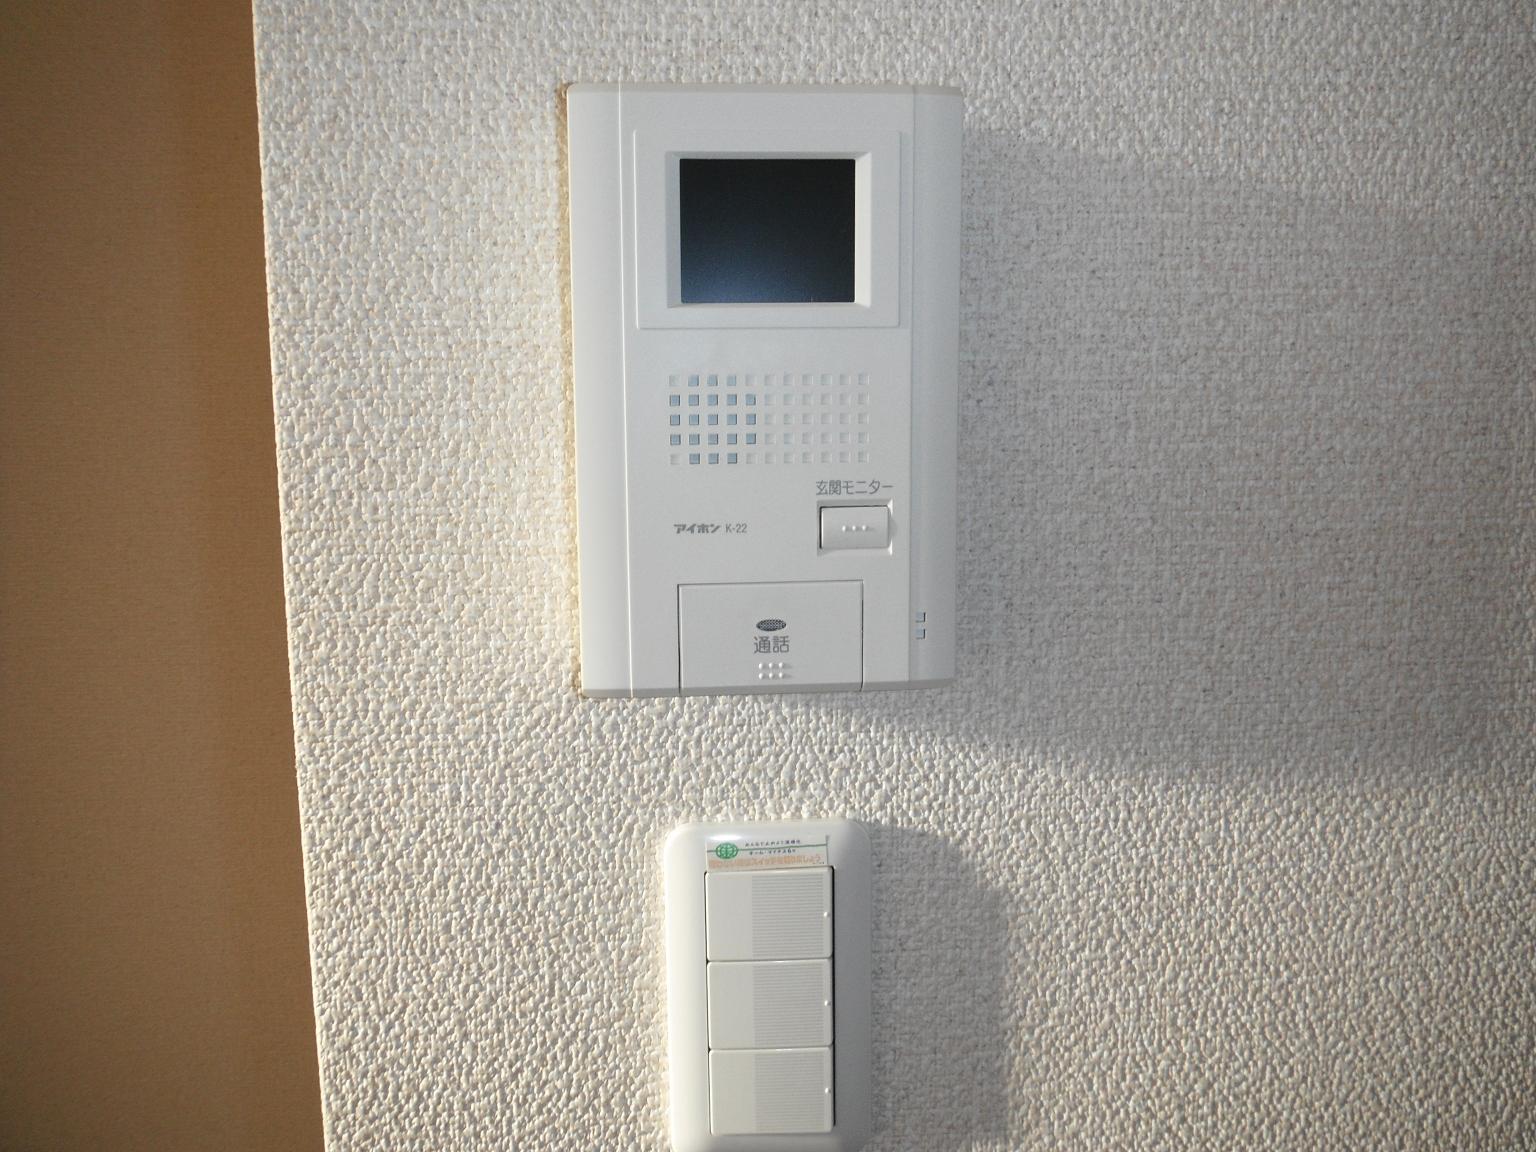 Security. Color monitor with intercom